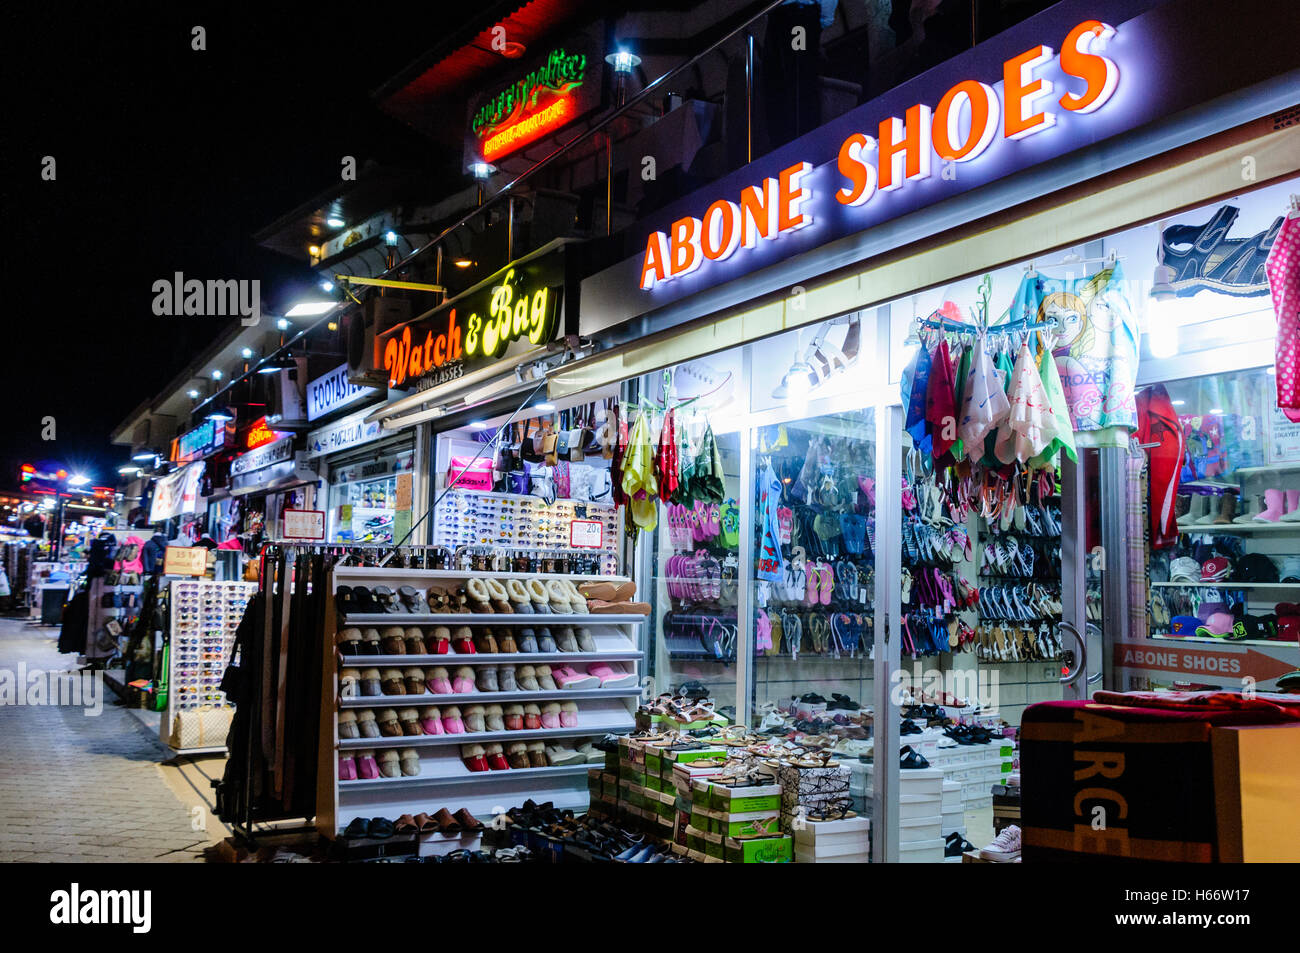 Row of shops in Turkey selling counterfeit clothing, sportswear, Ugg boots,  sunglasses and watches Stock Photo - Alamy